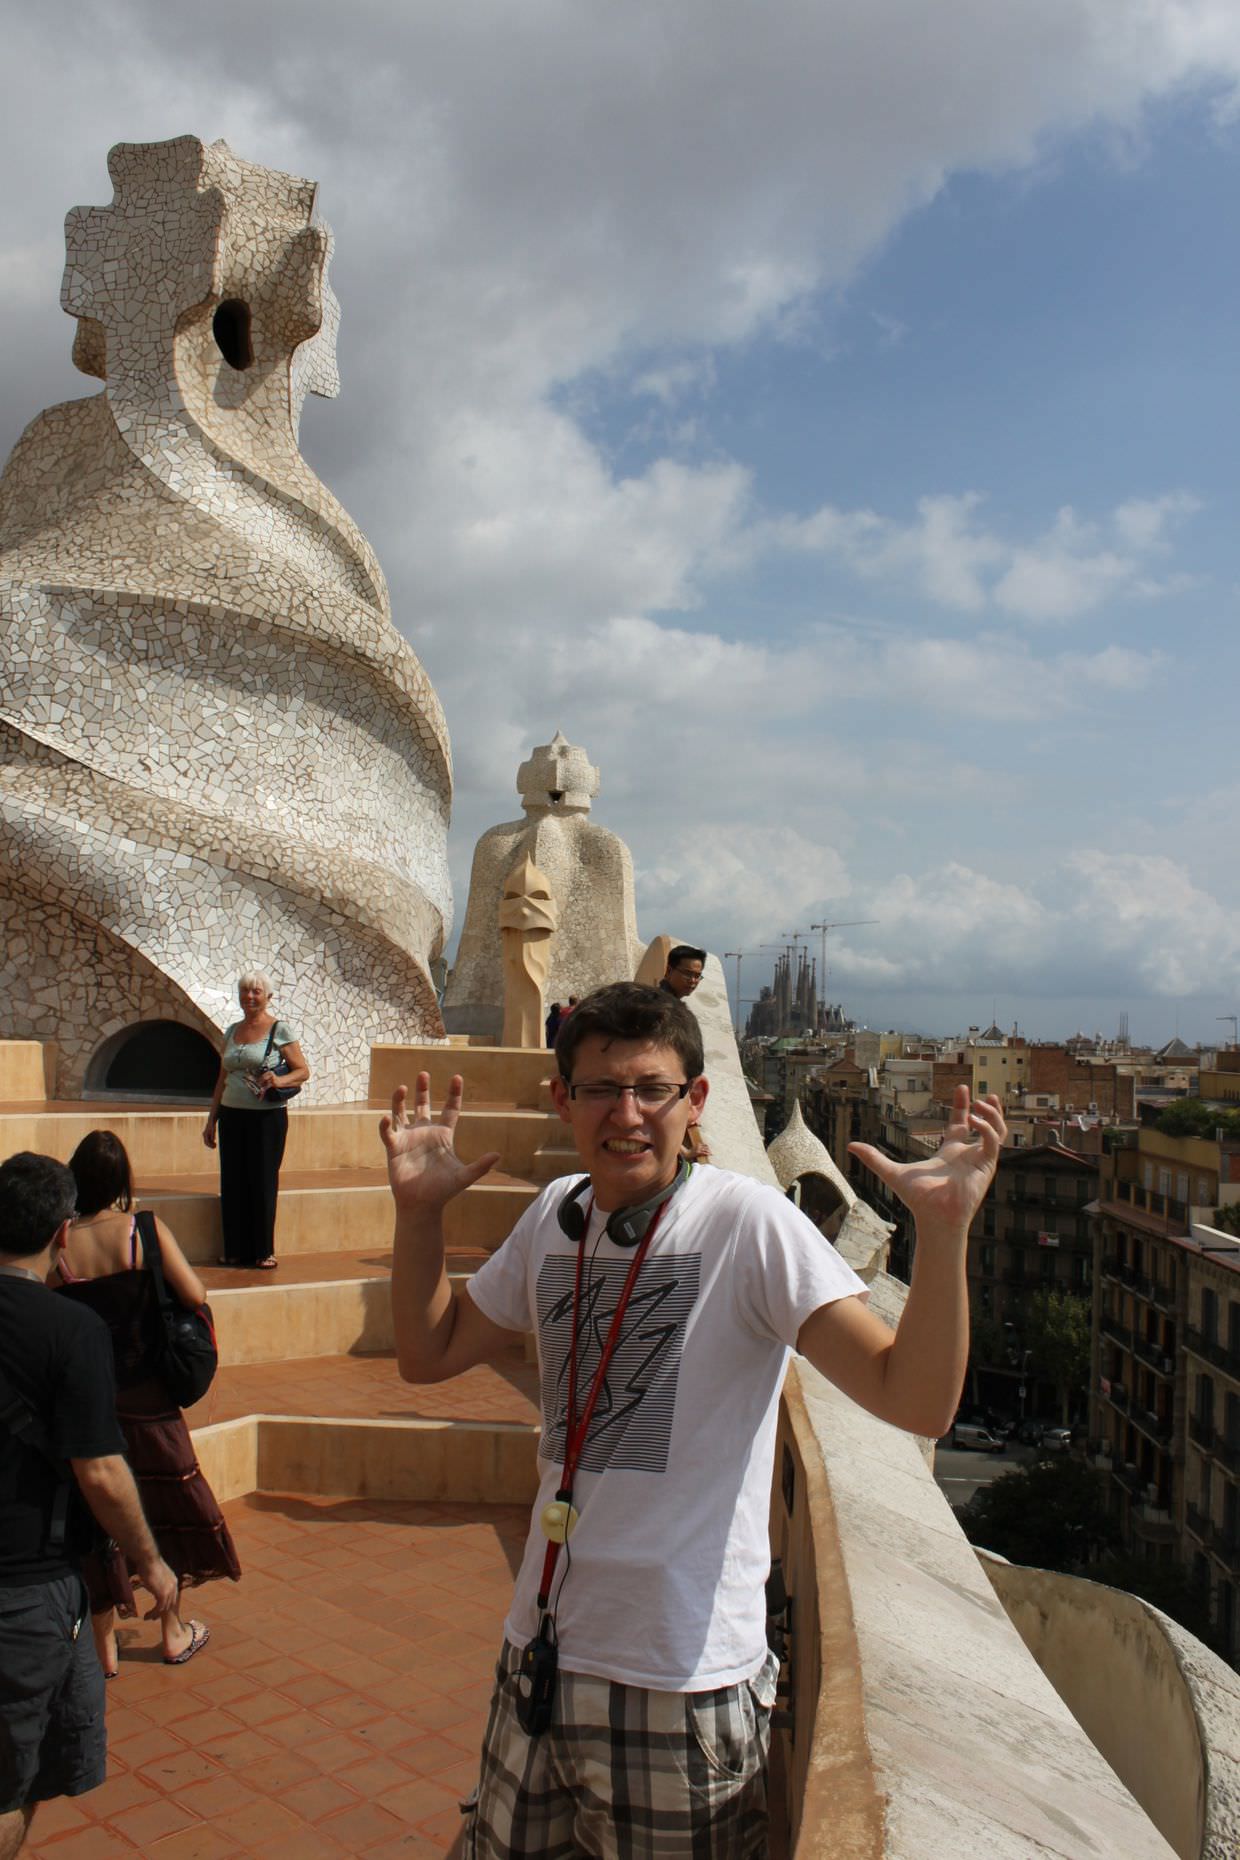 Paul, La Pedrera and La Sagrada Família in the distance. The expression is of frustration – there’s always someone else in the picture!